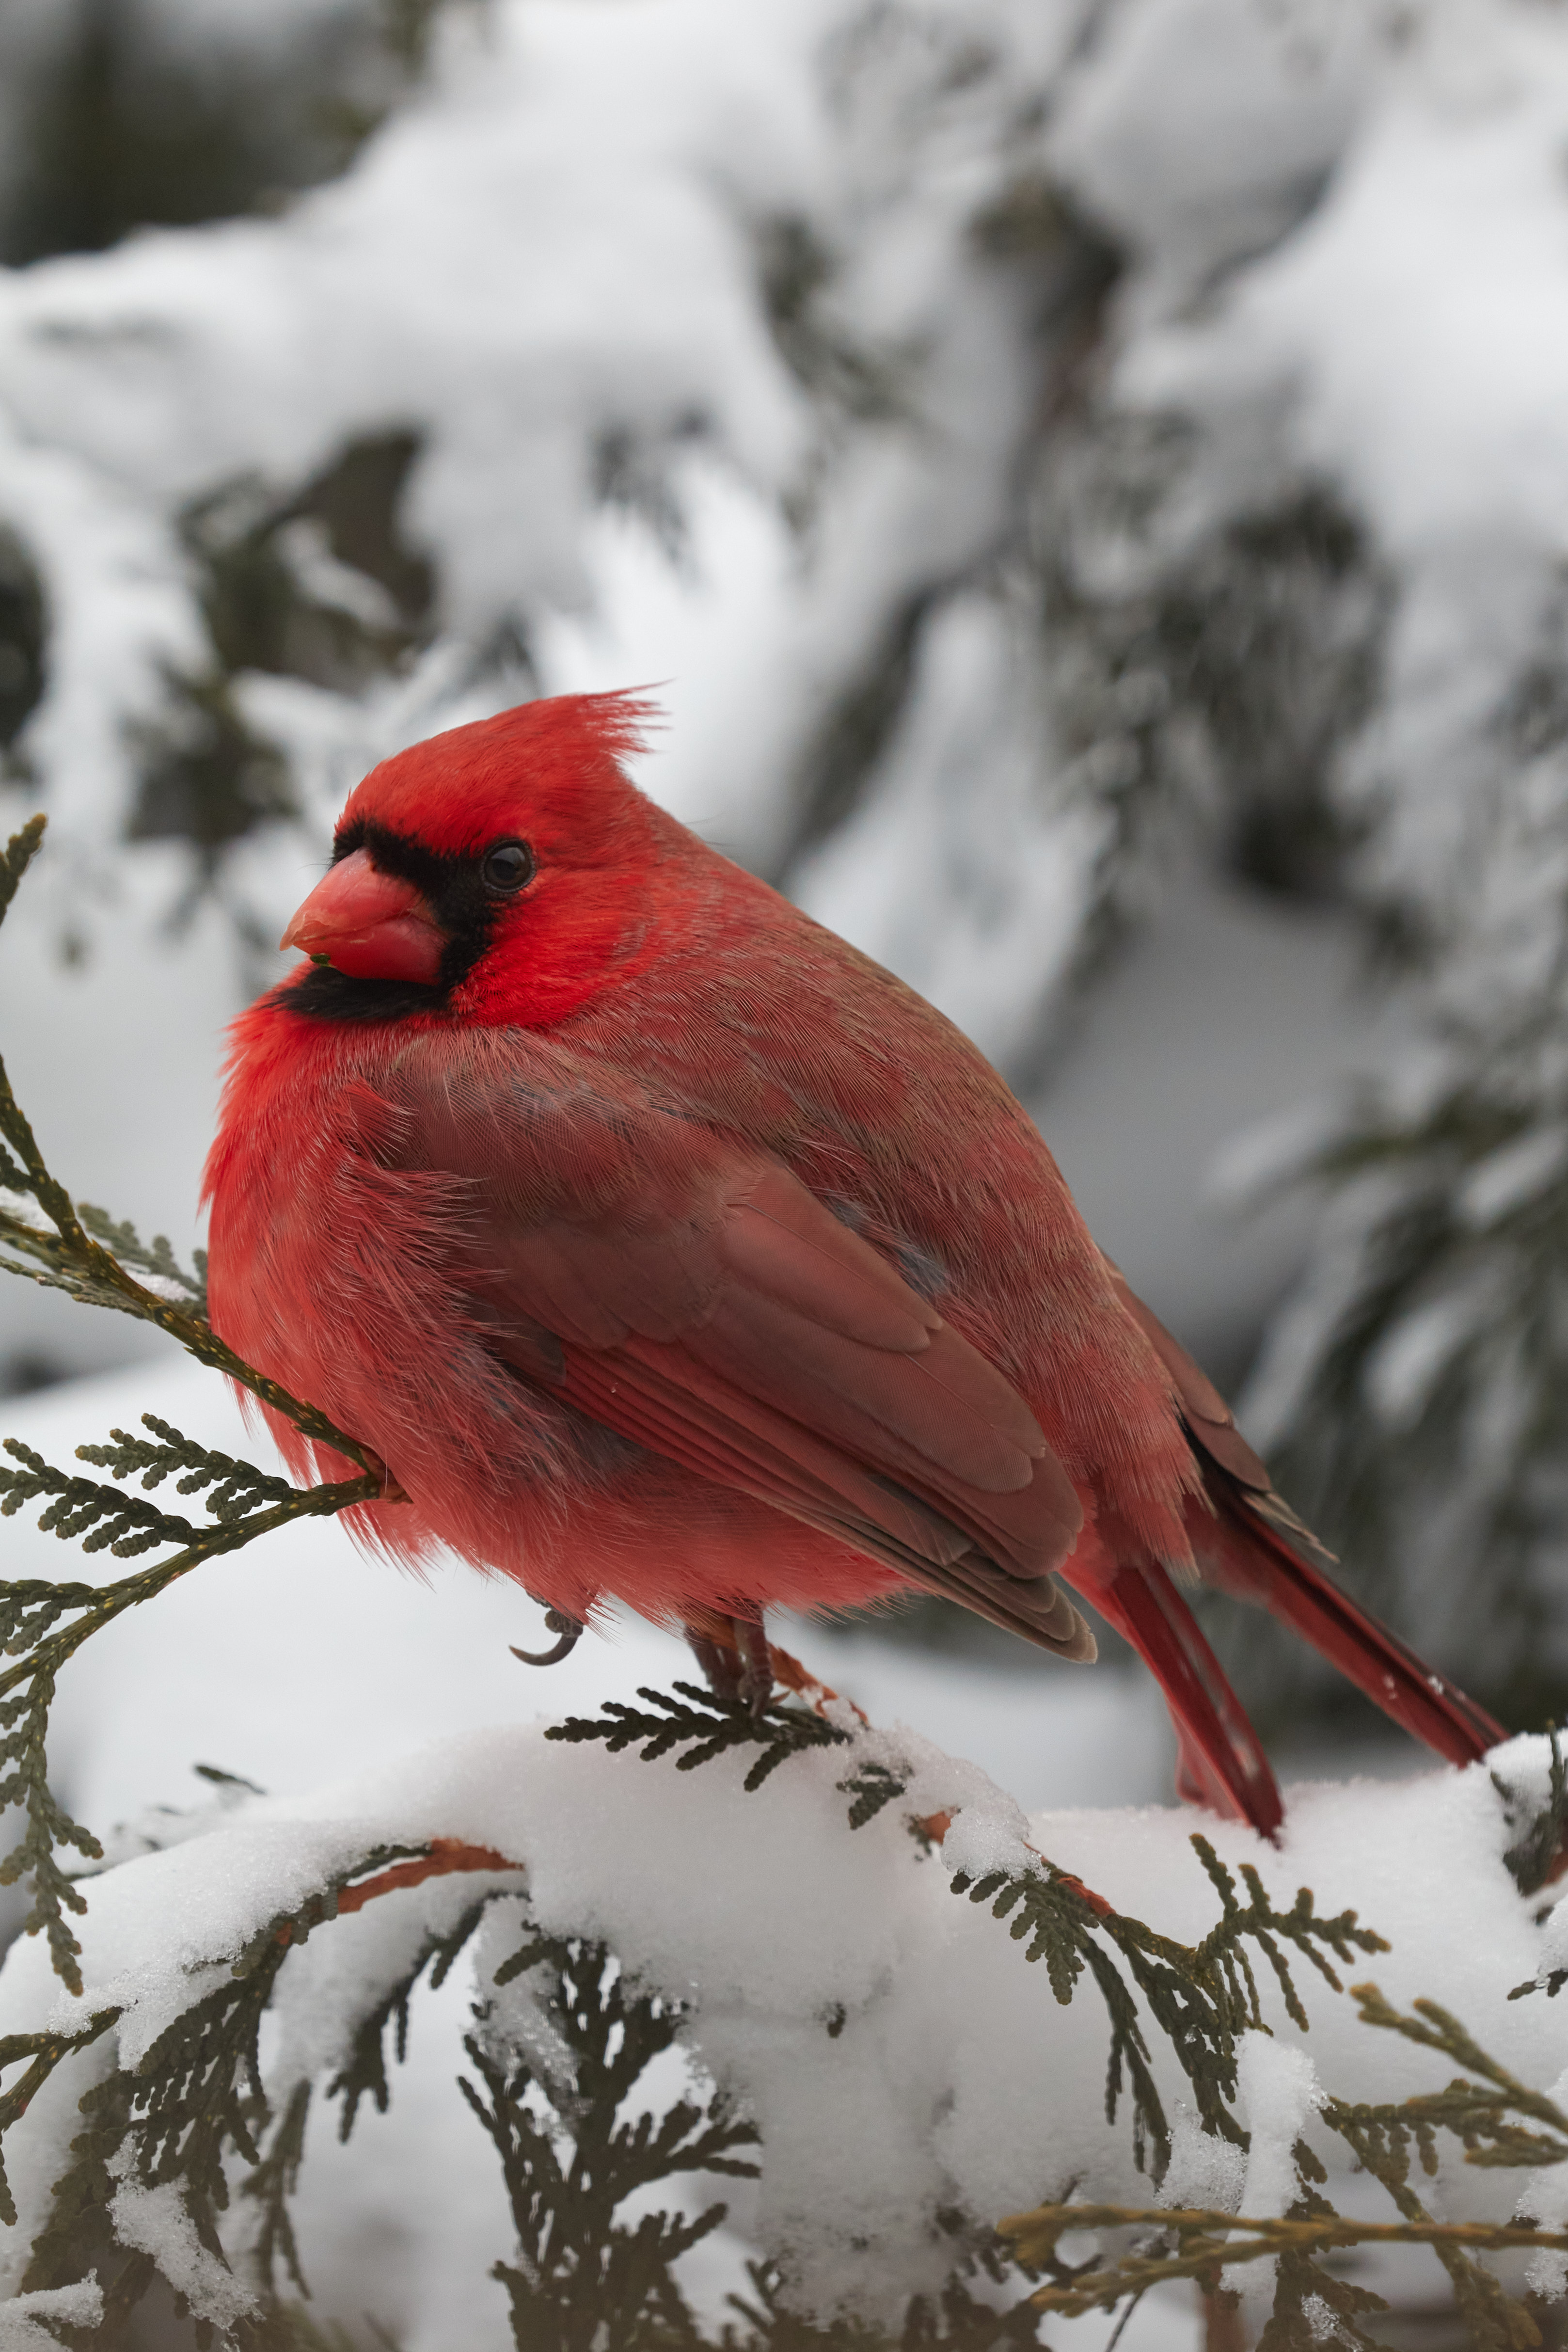 Cardinal sitting on bush branch - the bush is covered in snow.